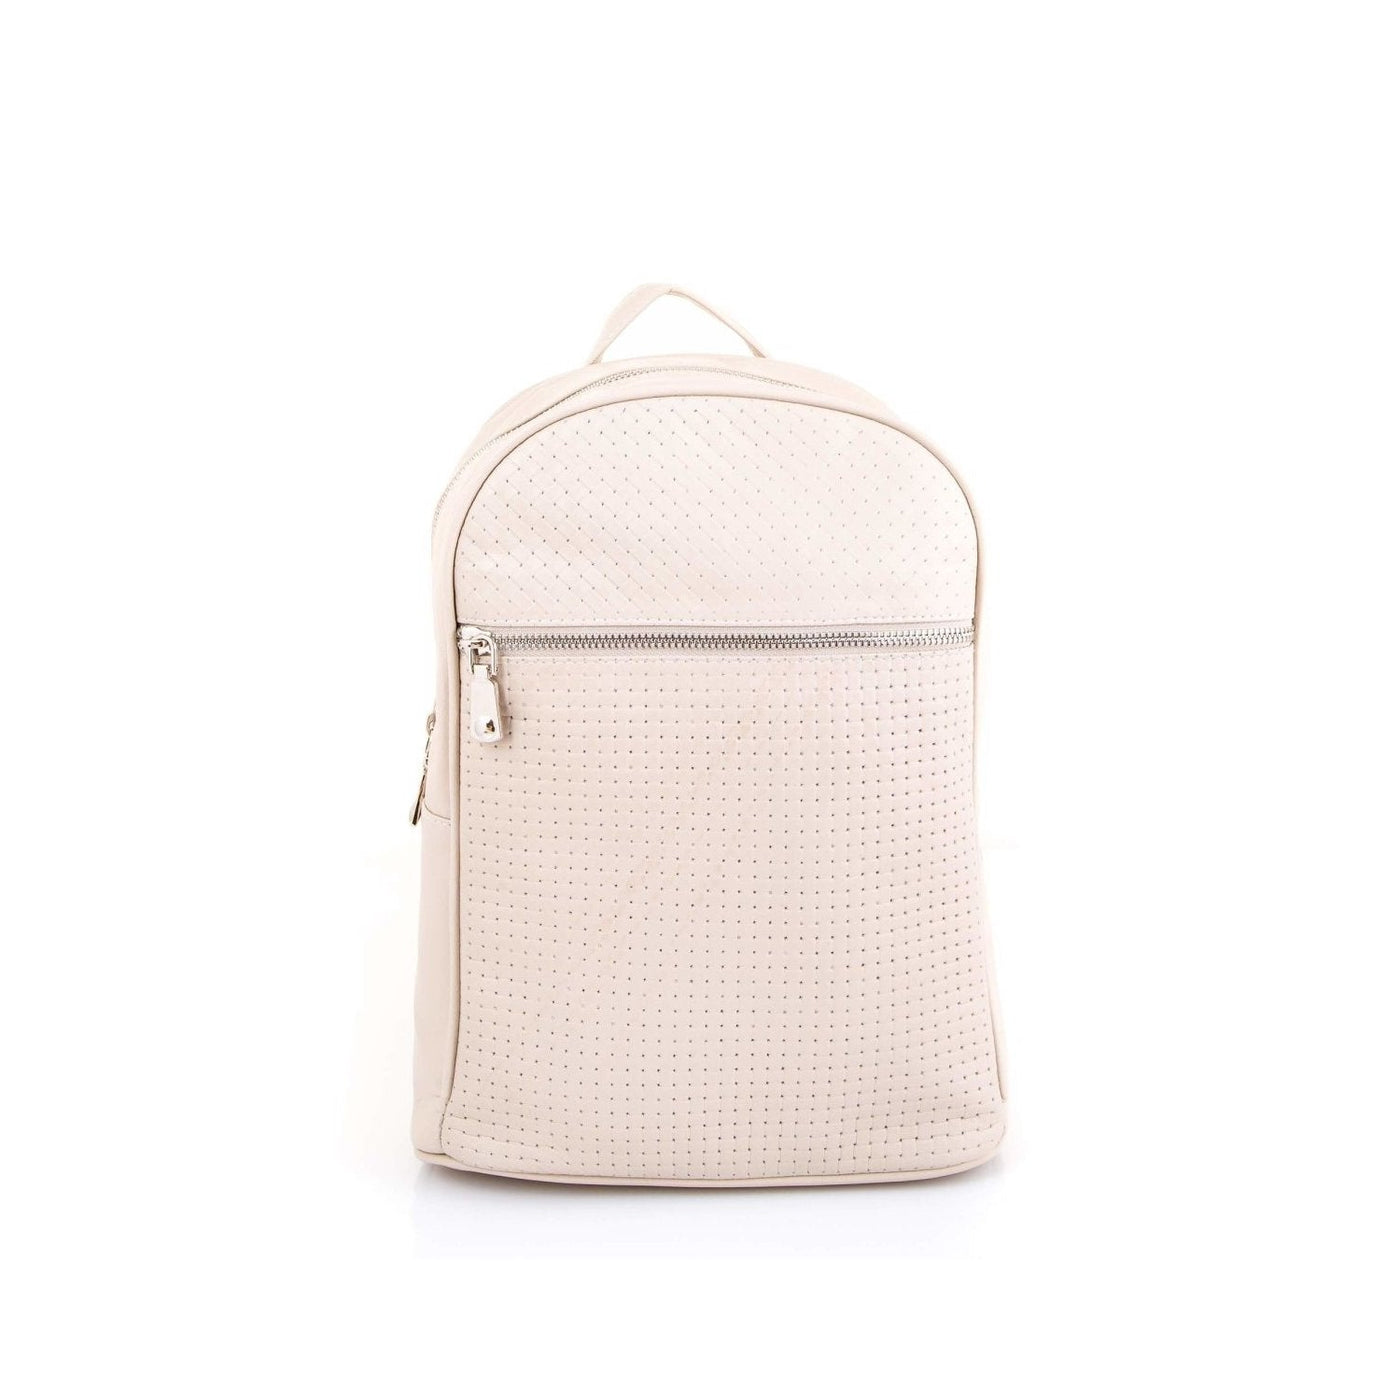 Compact Hot Stamped Unisex Leather Backpack - Ozzell London